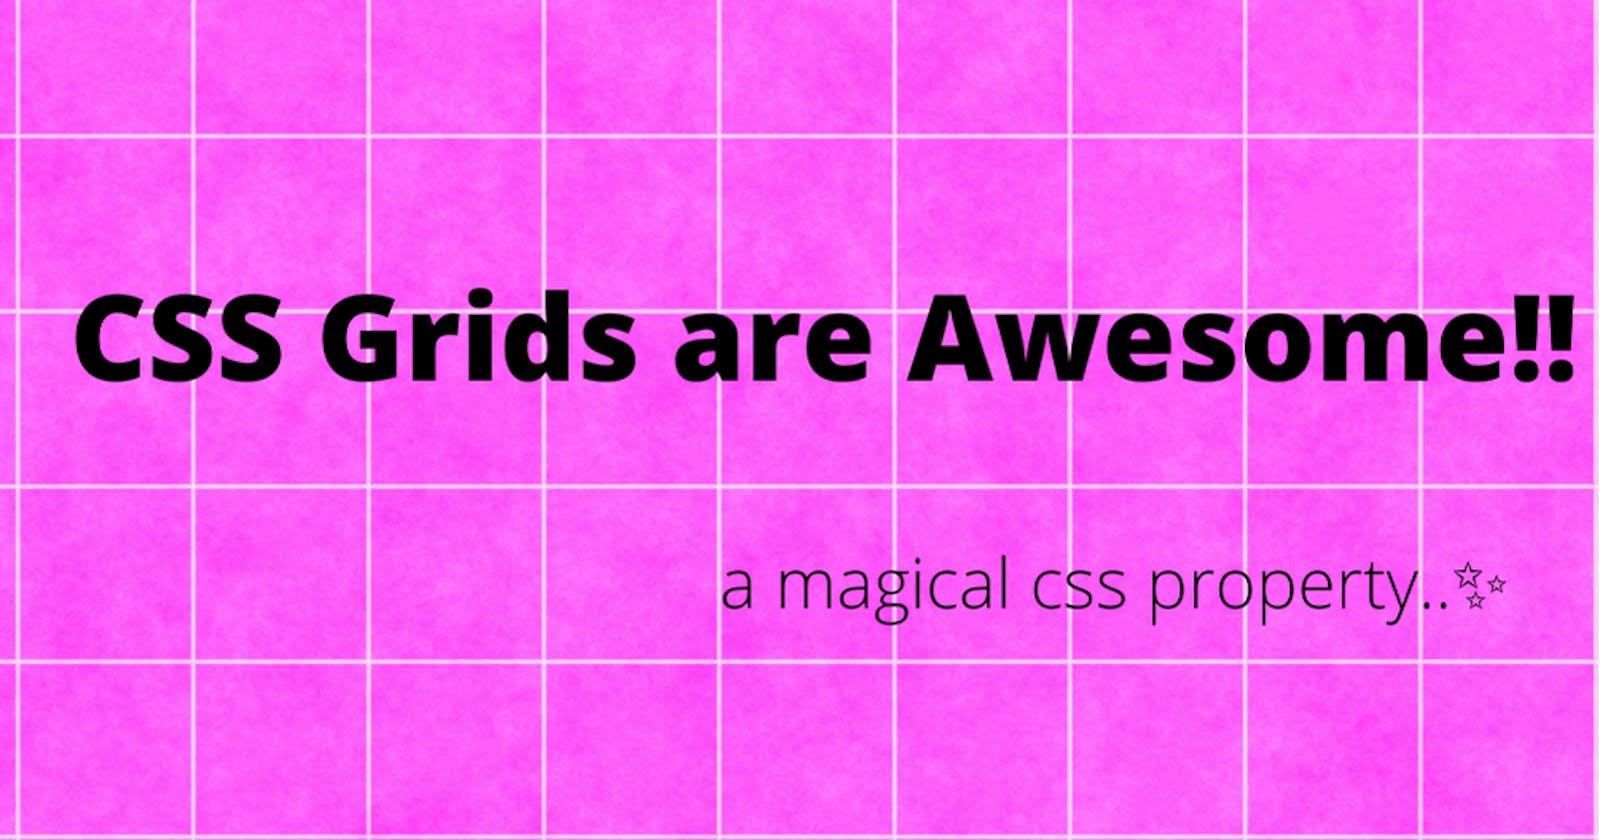 Learn basics of CSS grids.